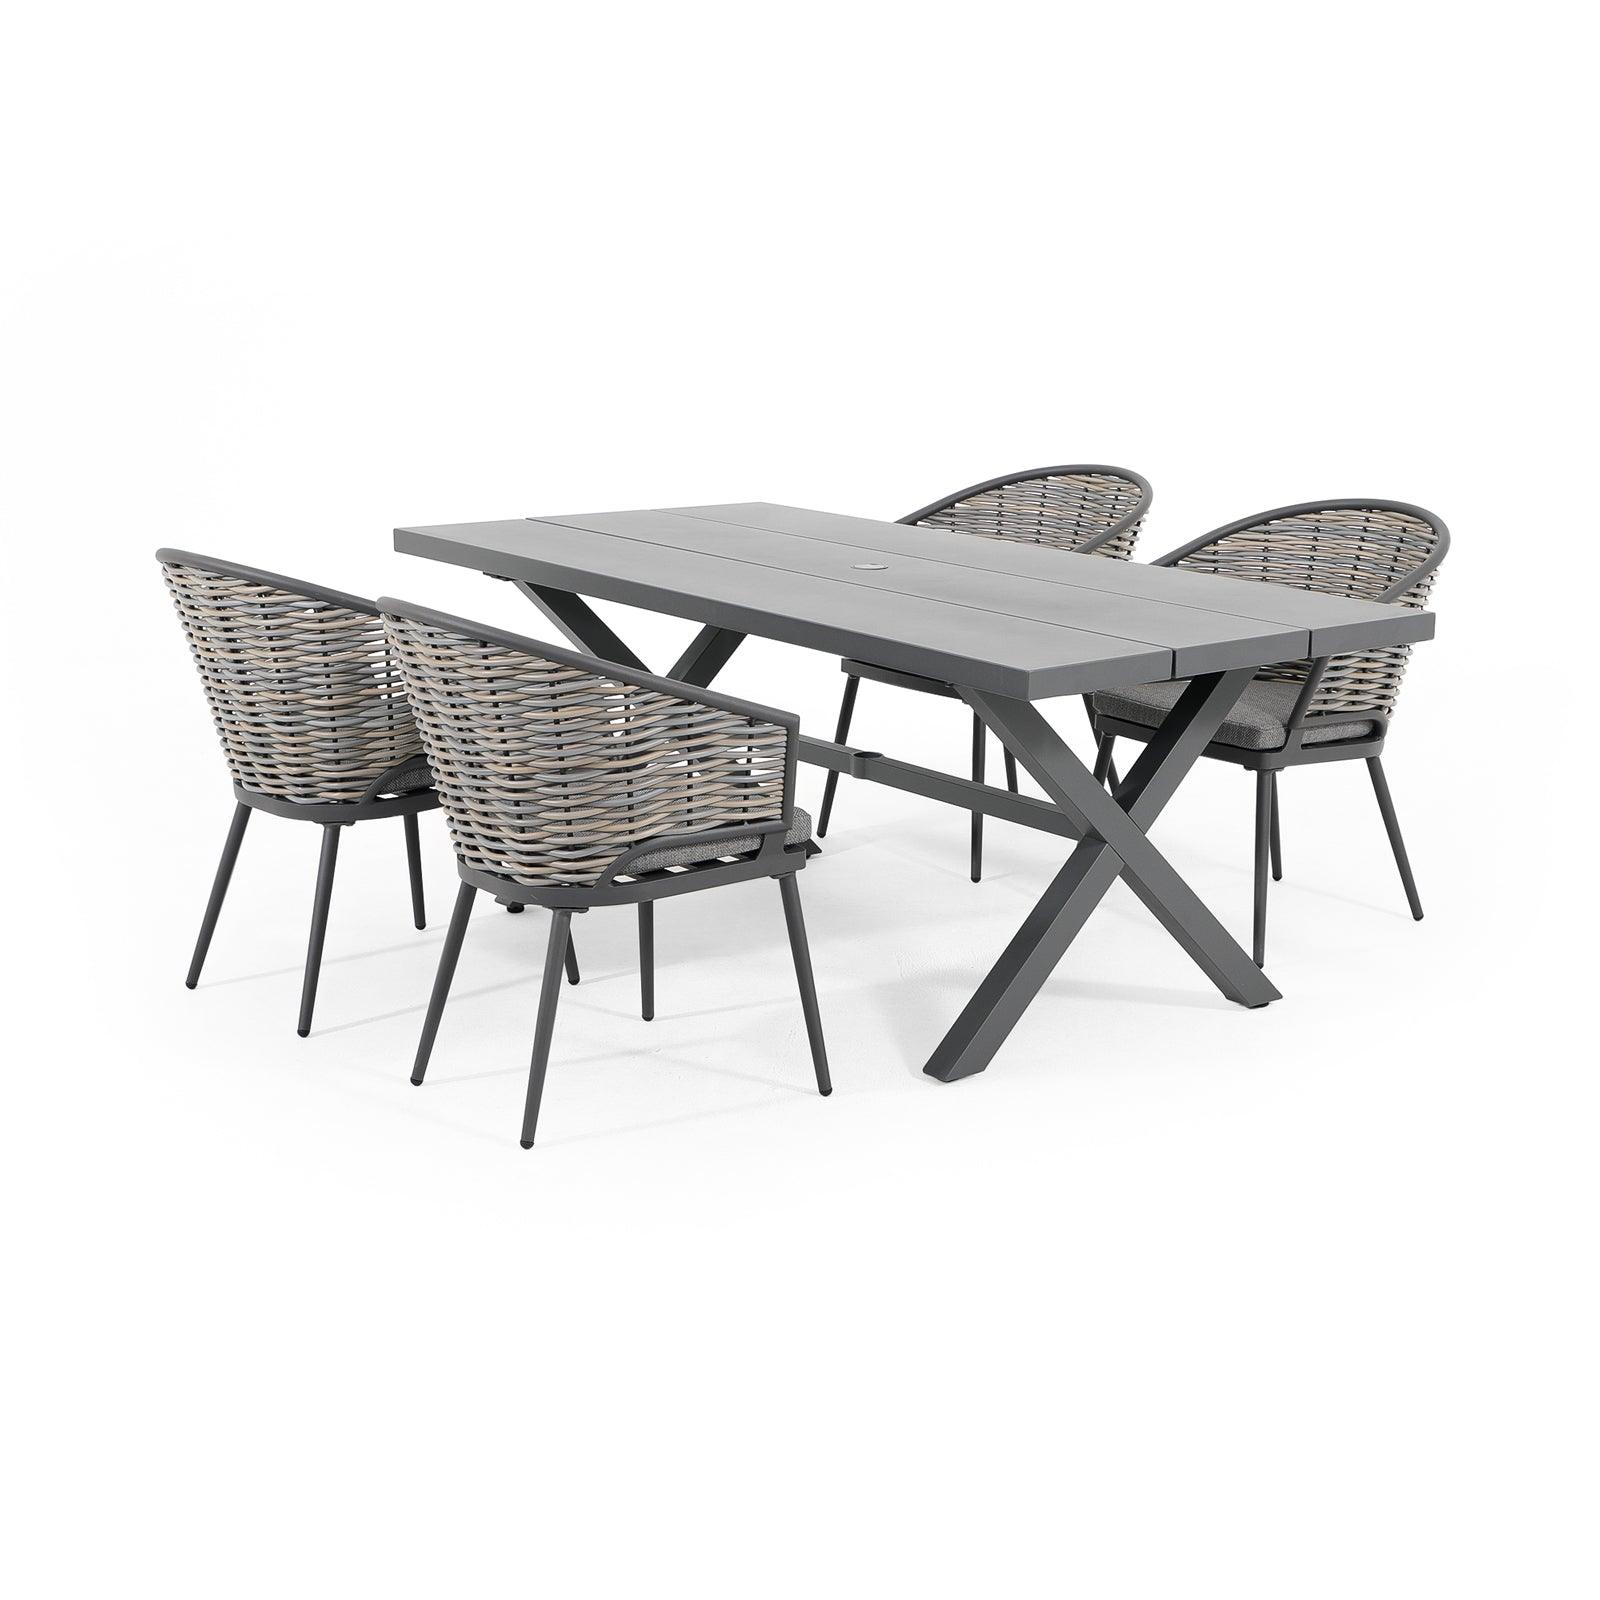 Burano Grey Outdoor Dining Set with aluminum frame, 4 dining chairs with grey cushions, 1 aluminum X-Shaped rectangle dining Table, white background - Jardina Furniture  #Pieces_5-pc.